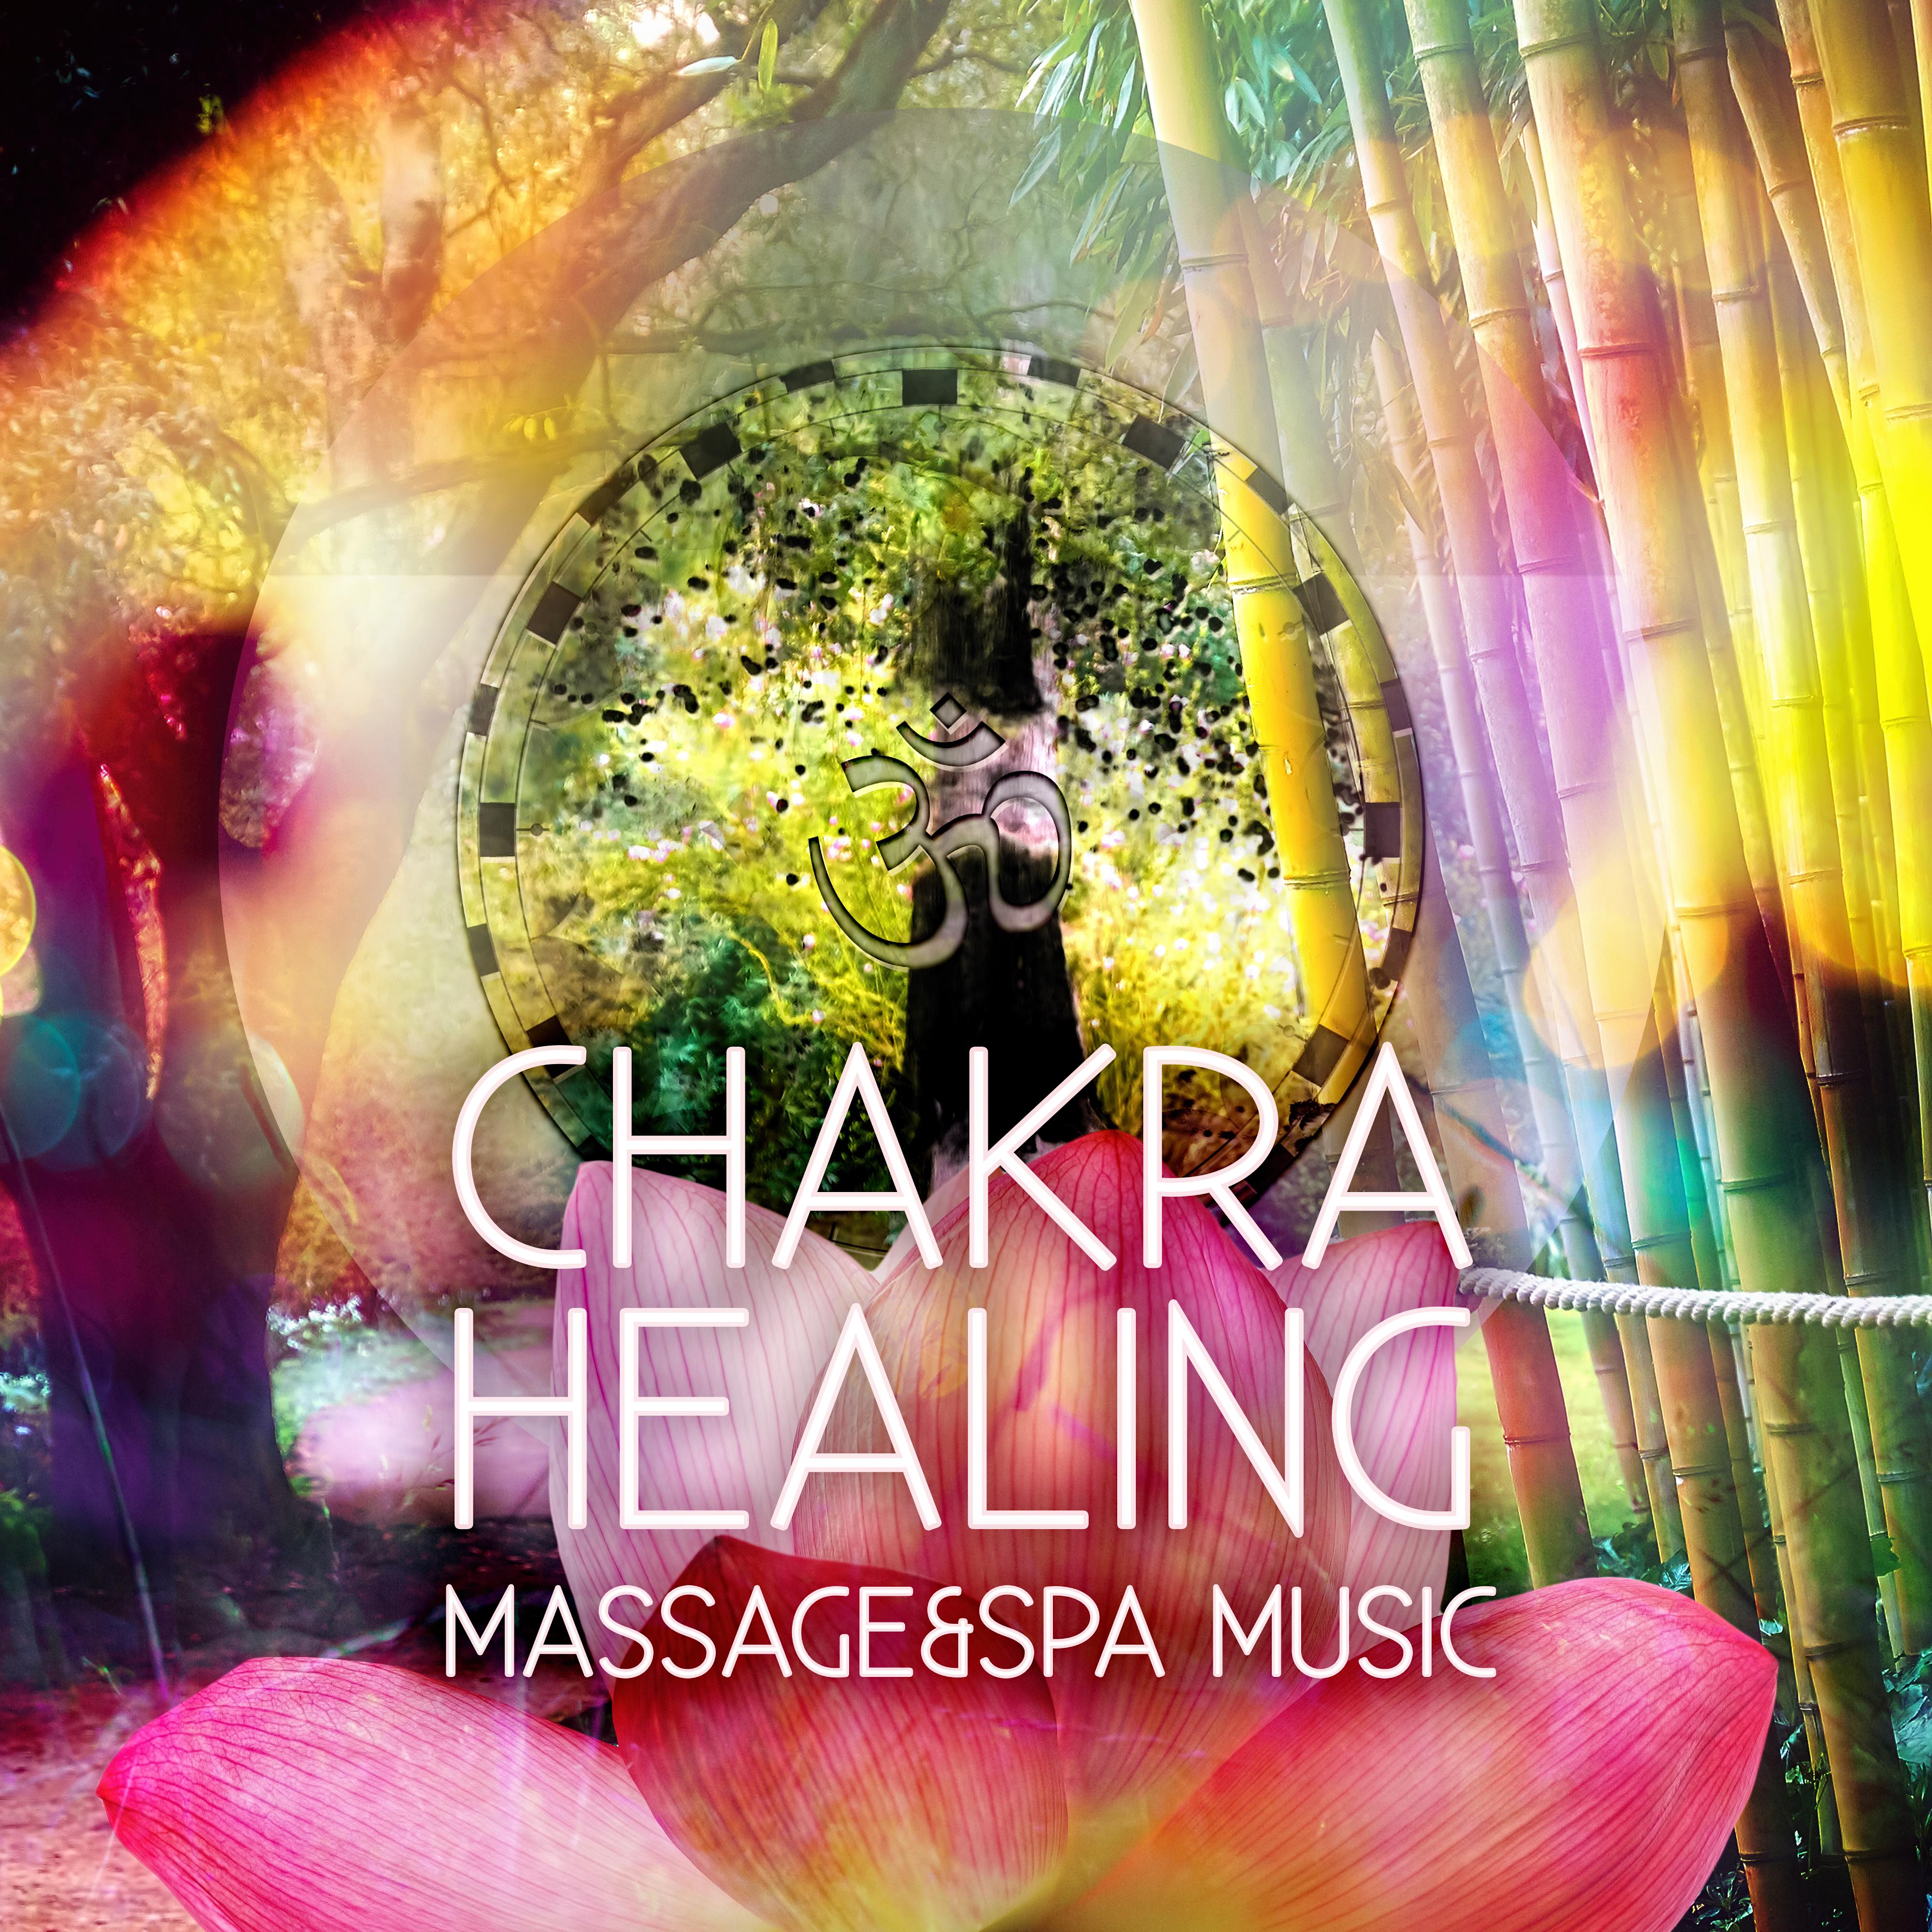 Chakra Healing - Massage & Spa Music, Serenity Relaxing Spa Music, Instrumental Music for Massage Therapy, Piano Music and Sounds of Nature Music for Relaxation, New Age Reiki